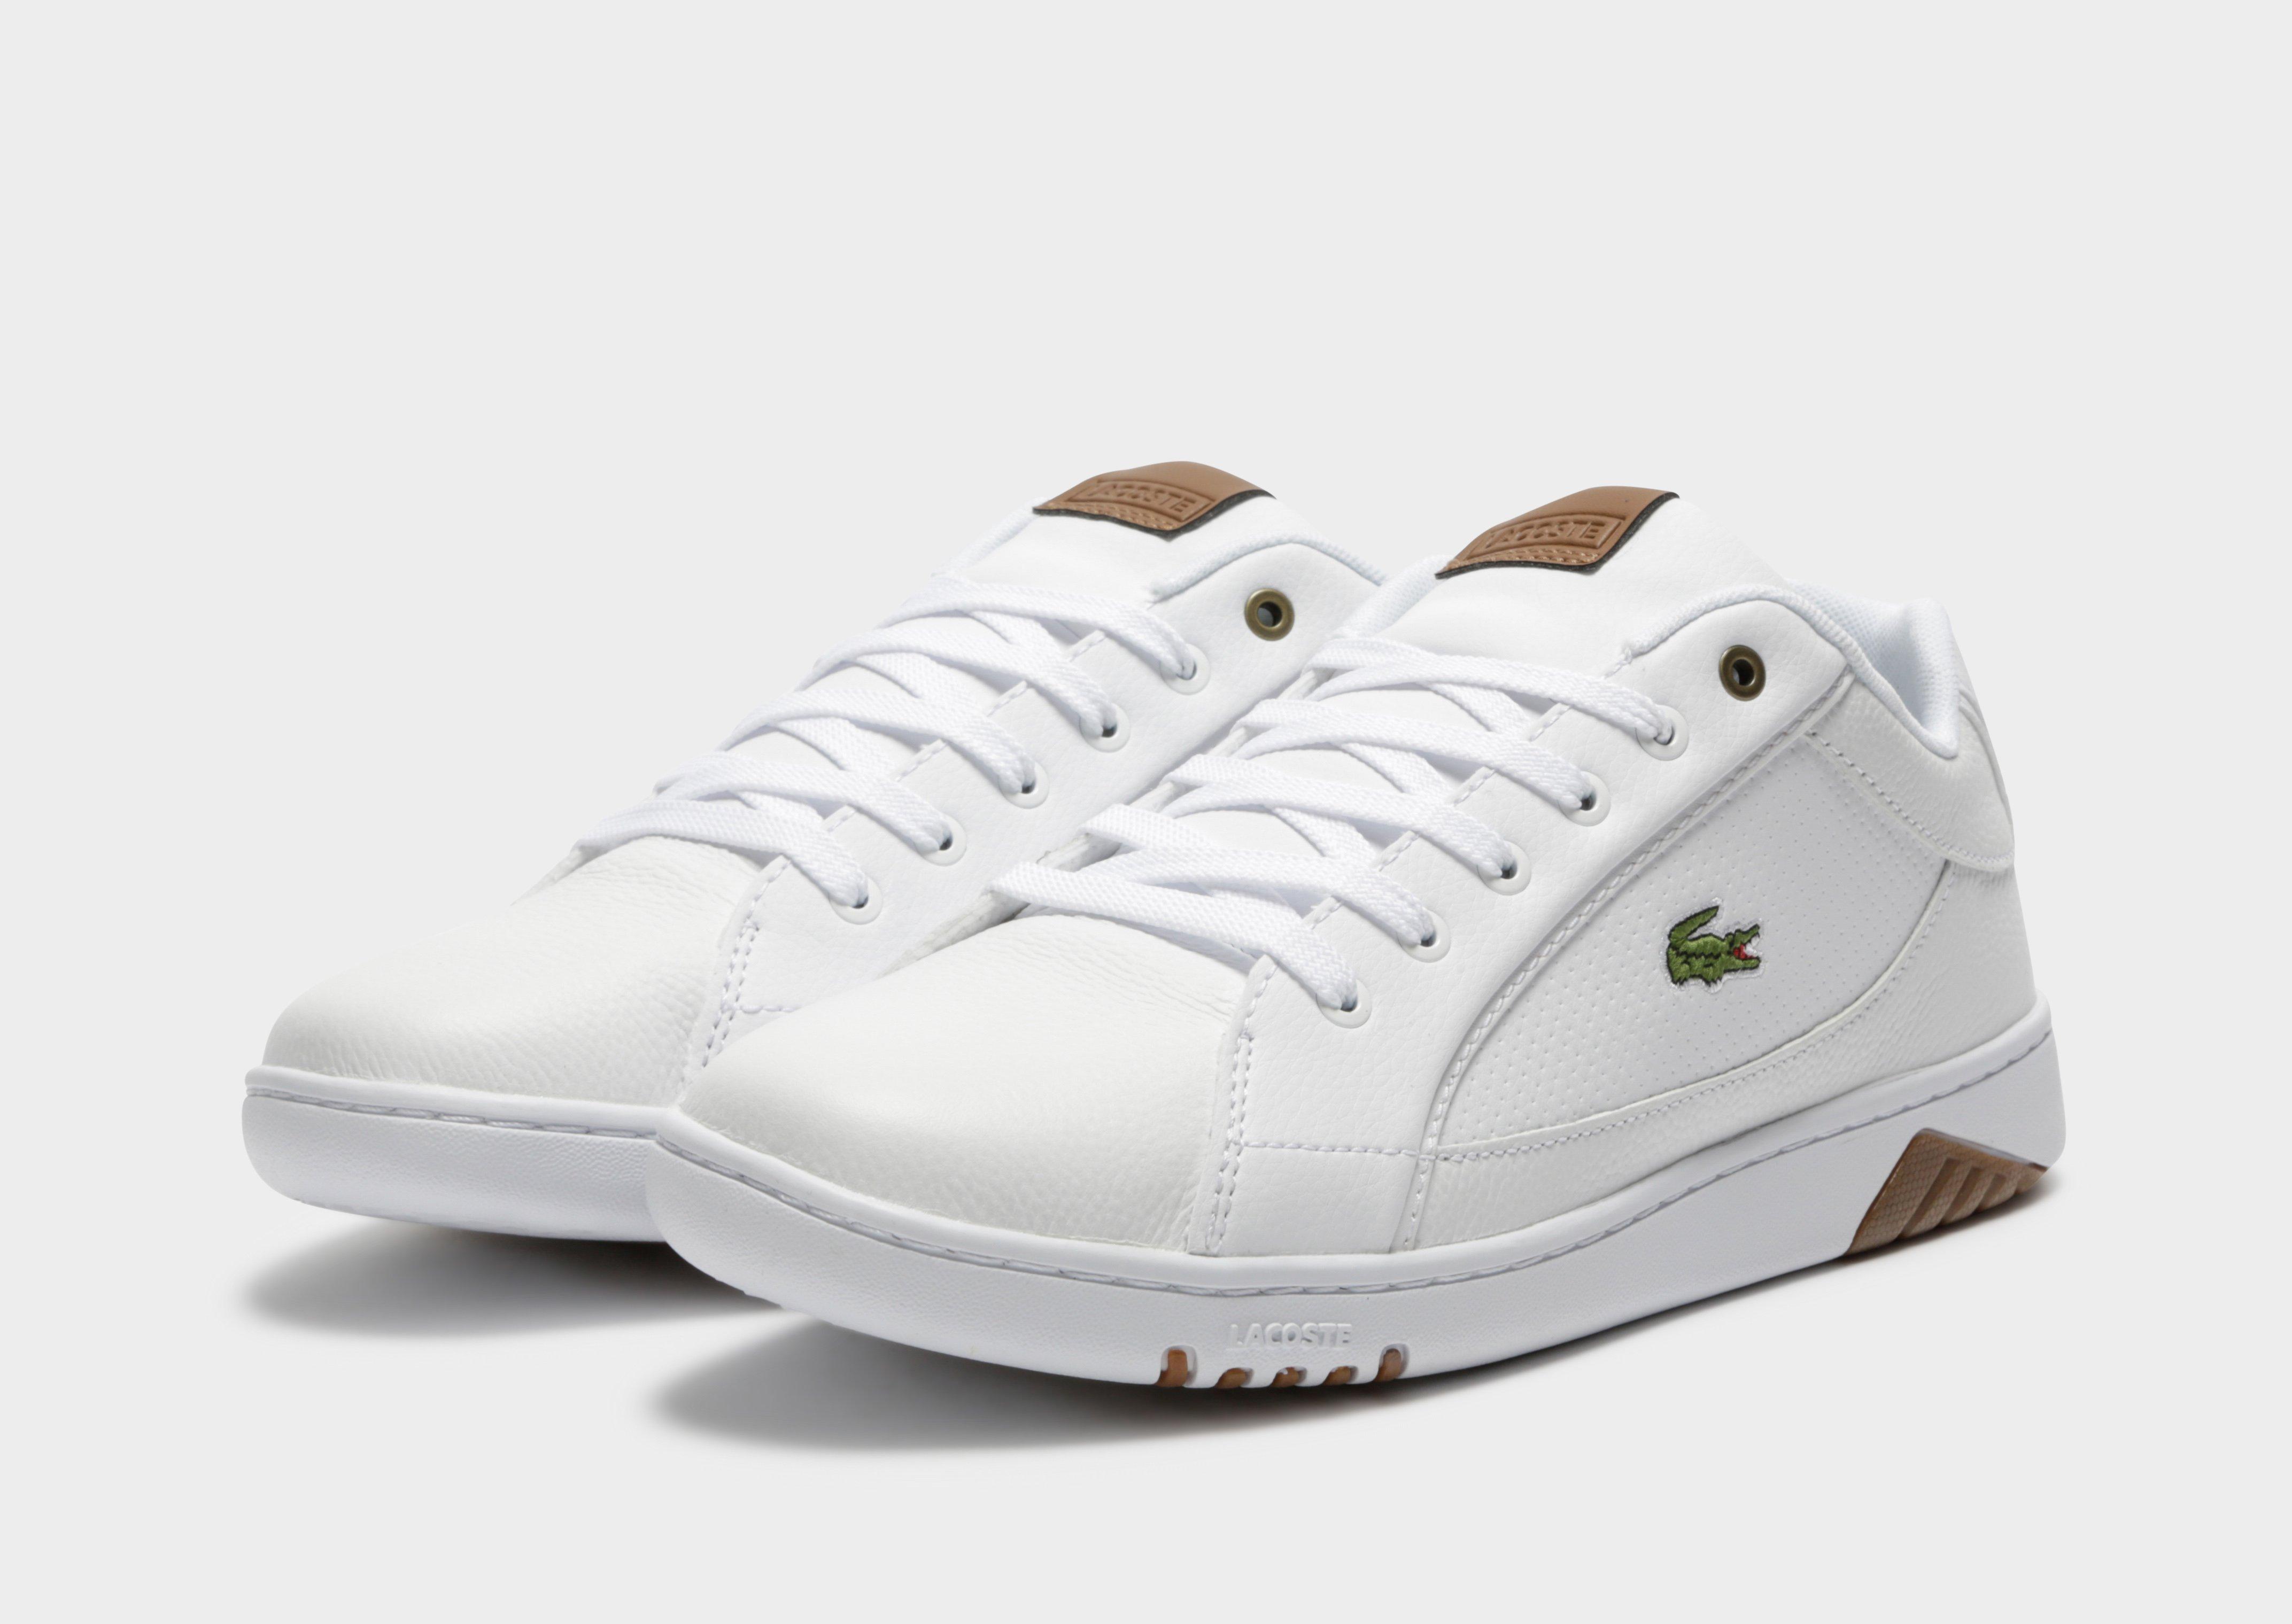 jd sports mens lacoste trainers